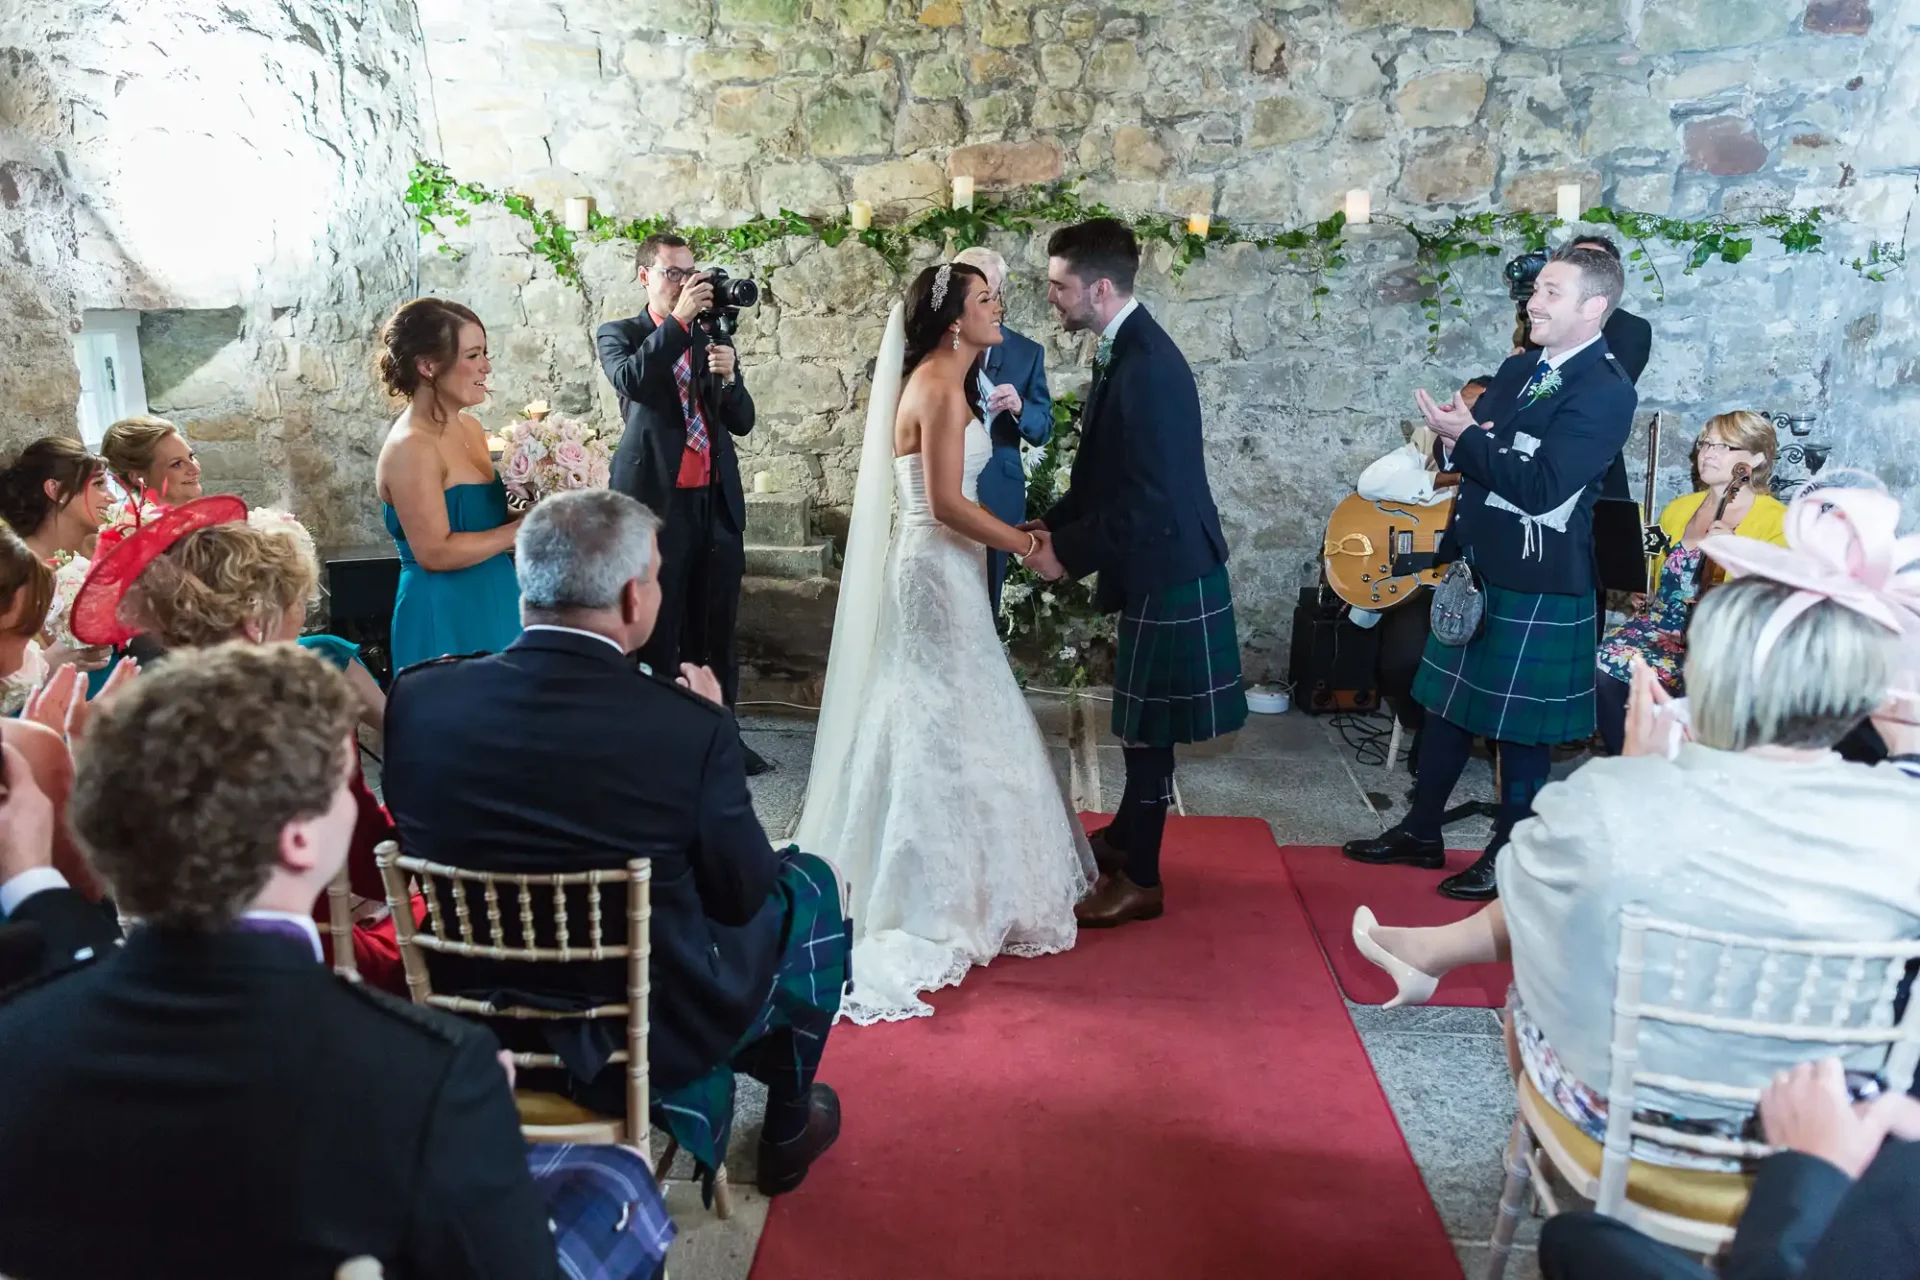 A bride and groom exchange vows at an intimate indoor wedding ceremony, with guests in formal attire and a musician playing the bagpipes.